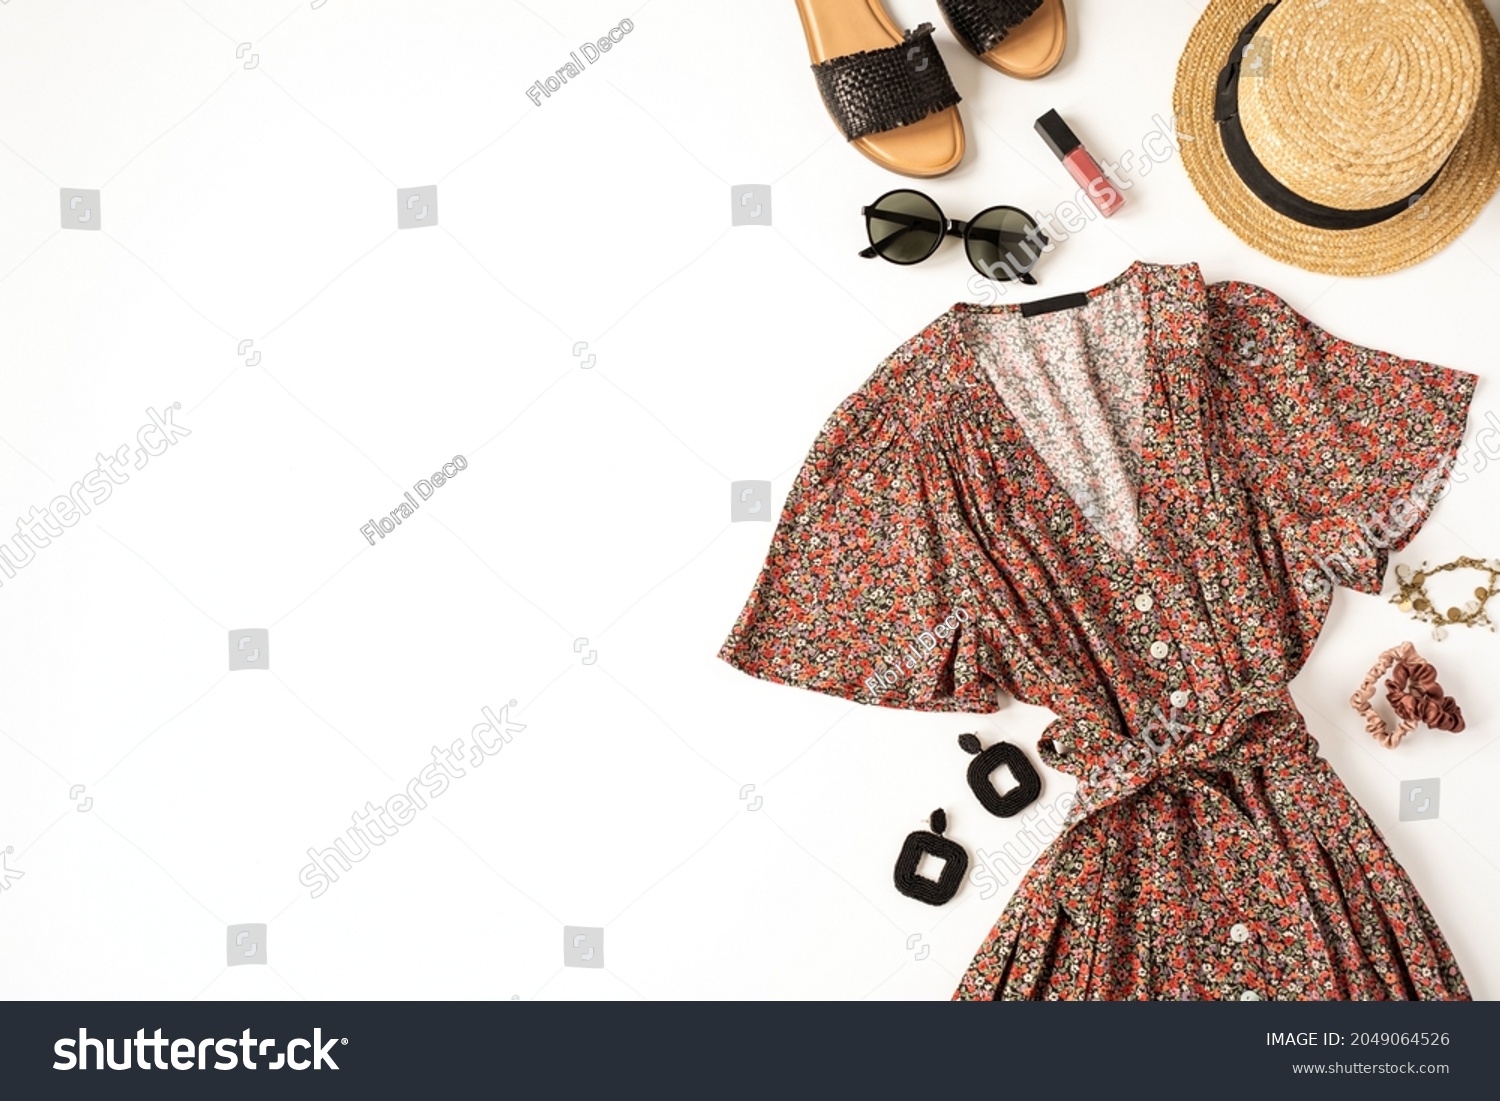 192,790 Clothes layed out Stock Photos, Images & Photography | Shutterstock